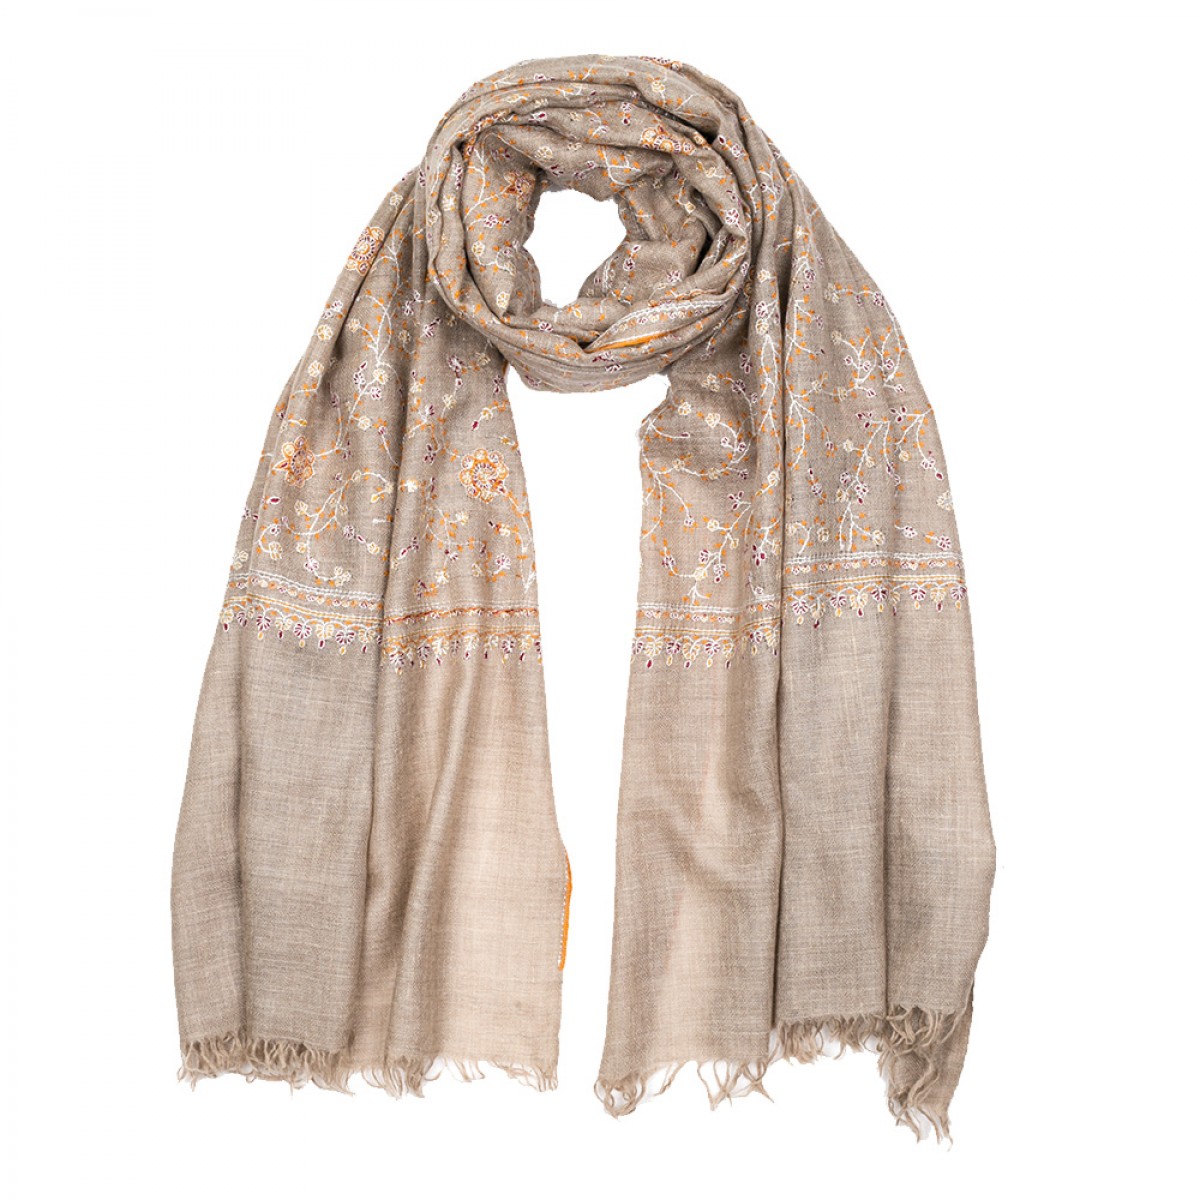 Embroidered Pashmina Stole - Natural & White